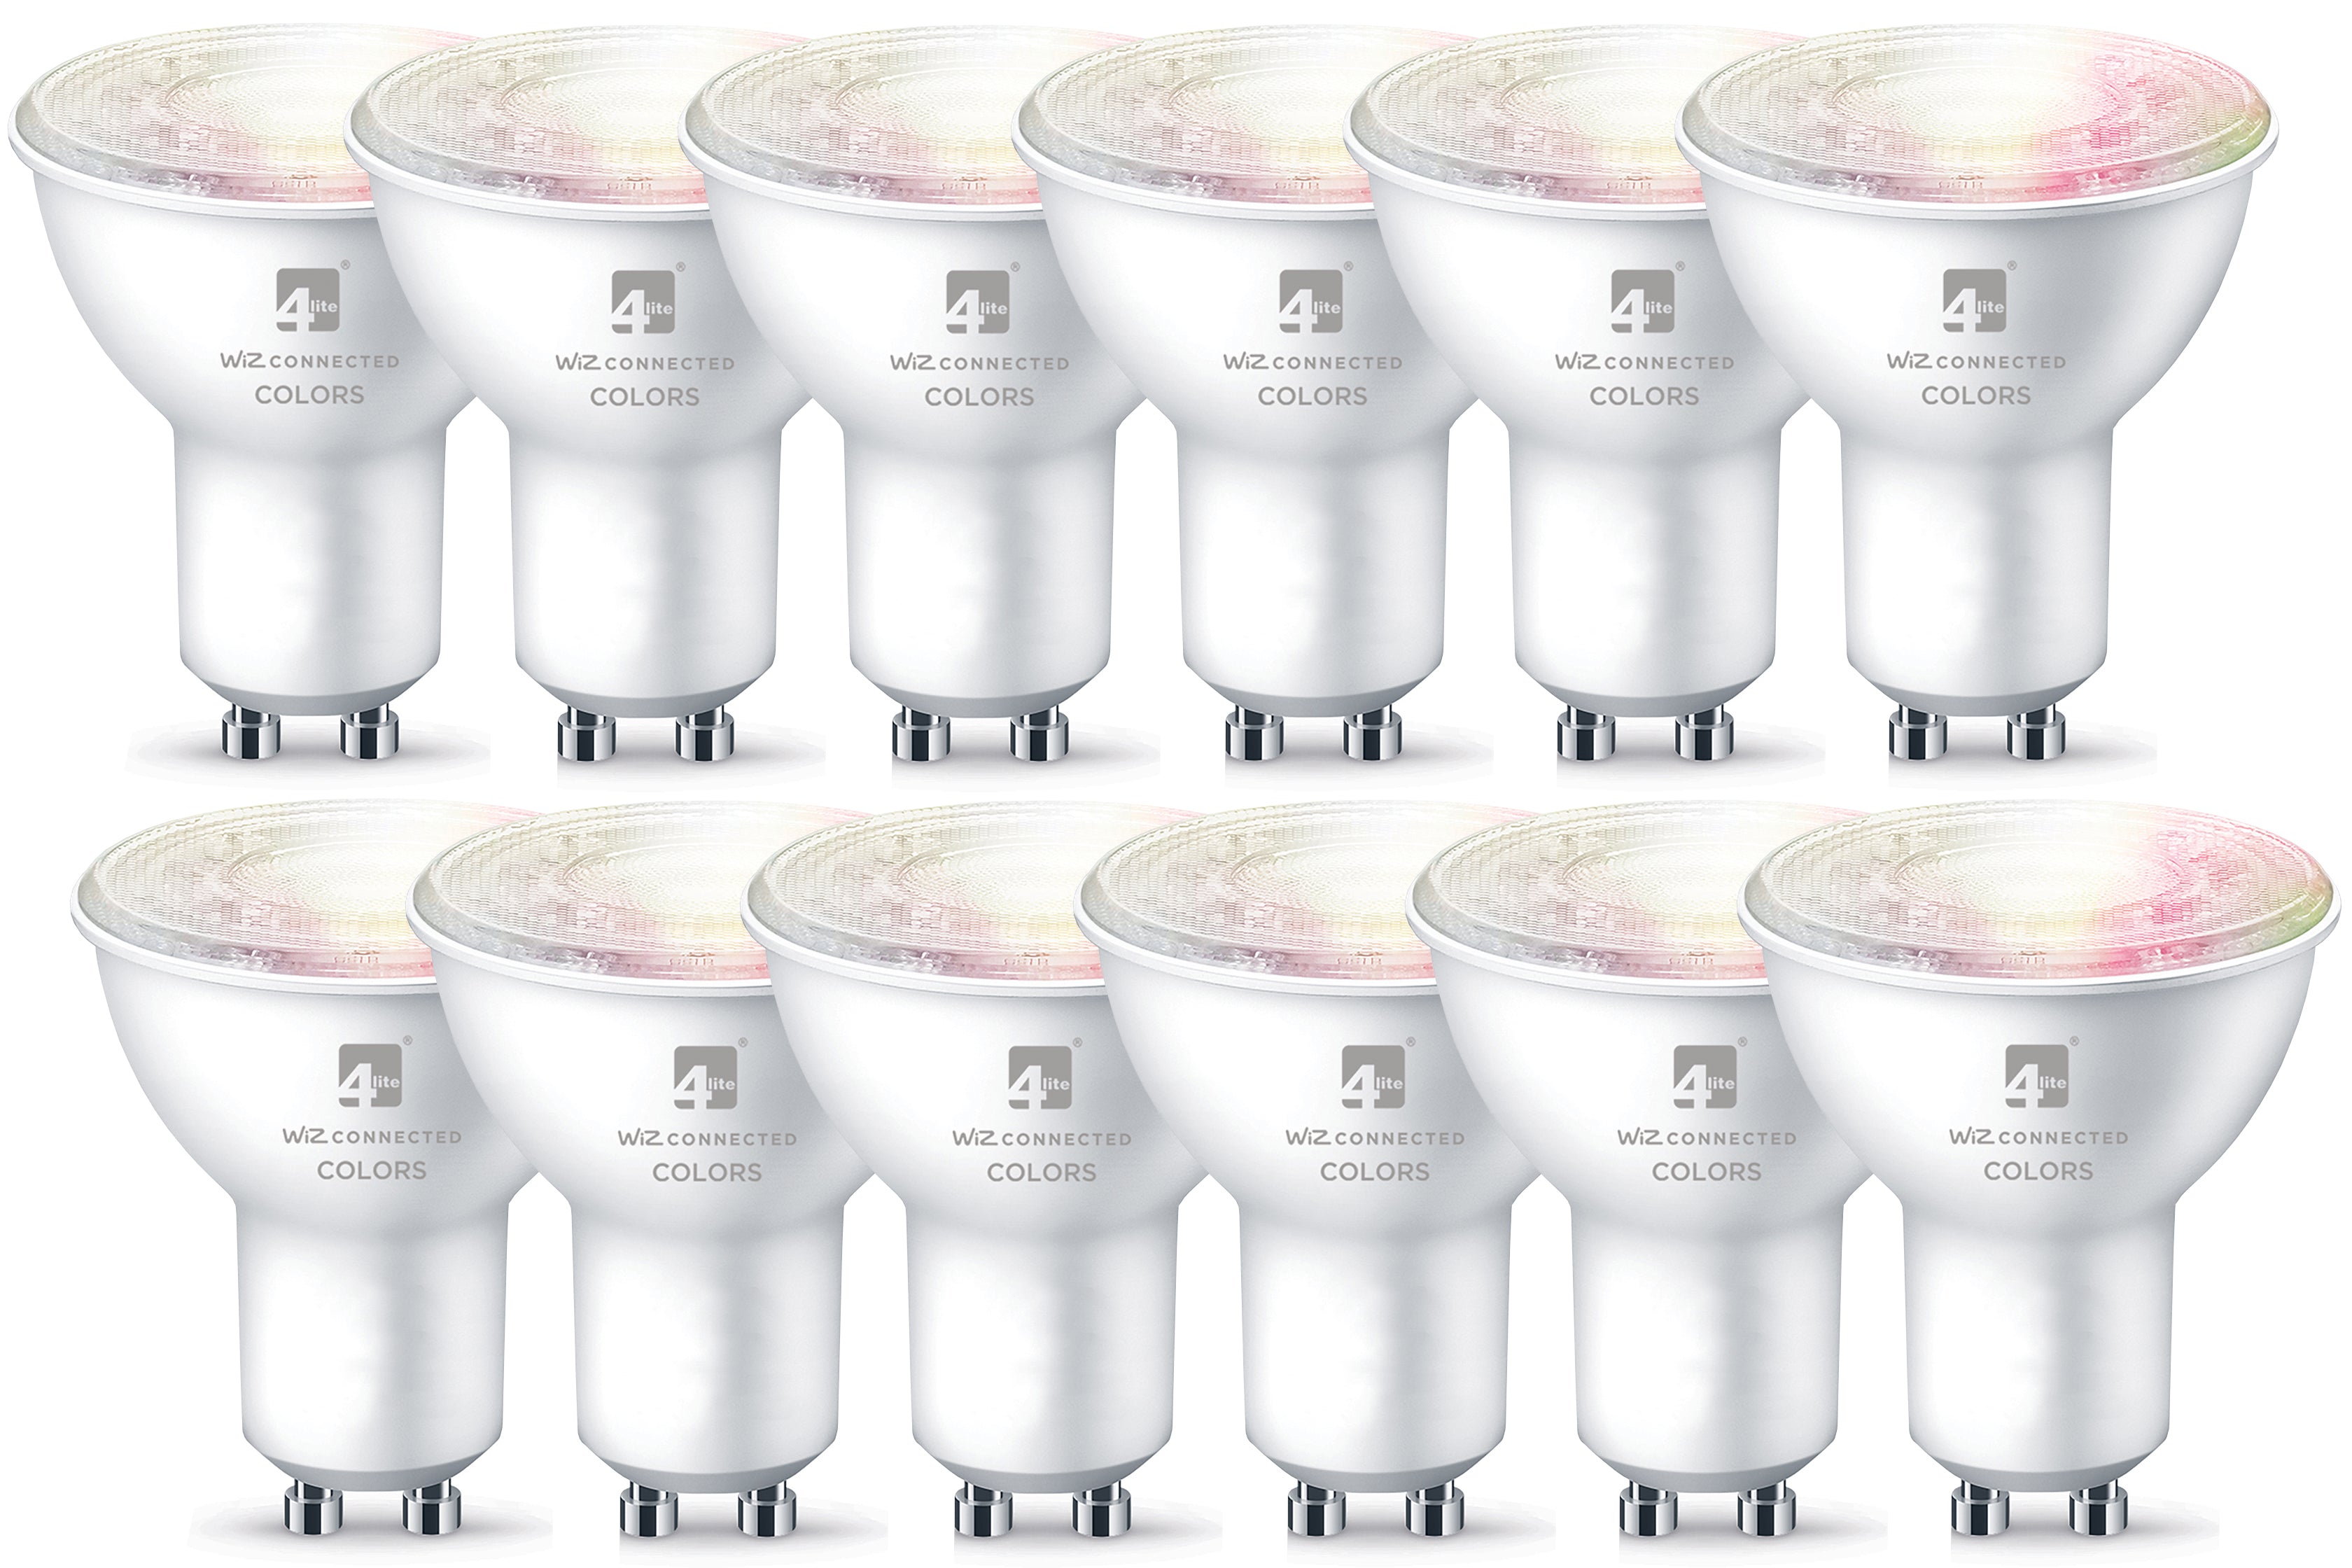 4lite Wiz Connected Dimmable Multicolour WiFi LED Smart Bulb - GU10 (Pack of 12)